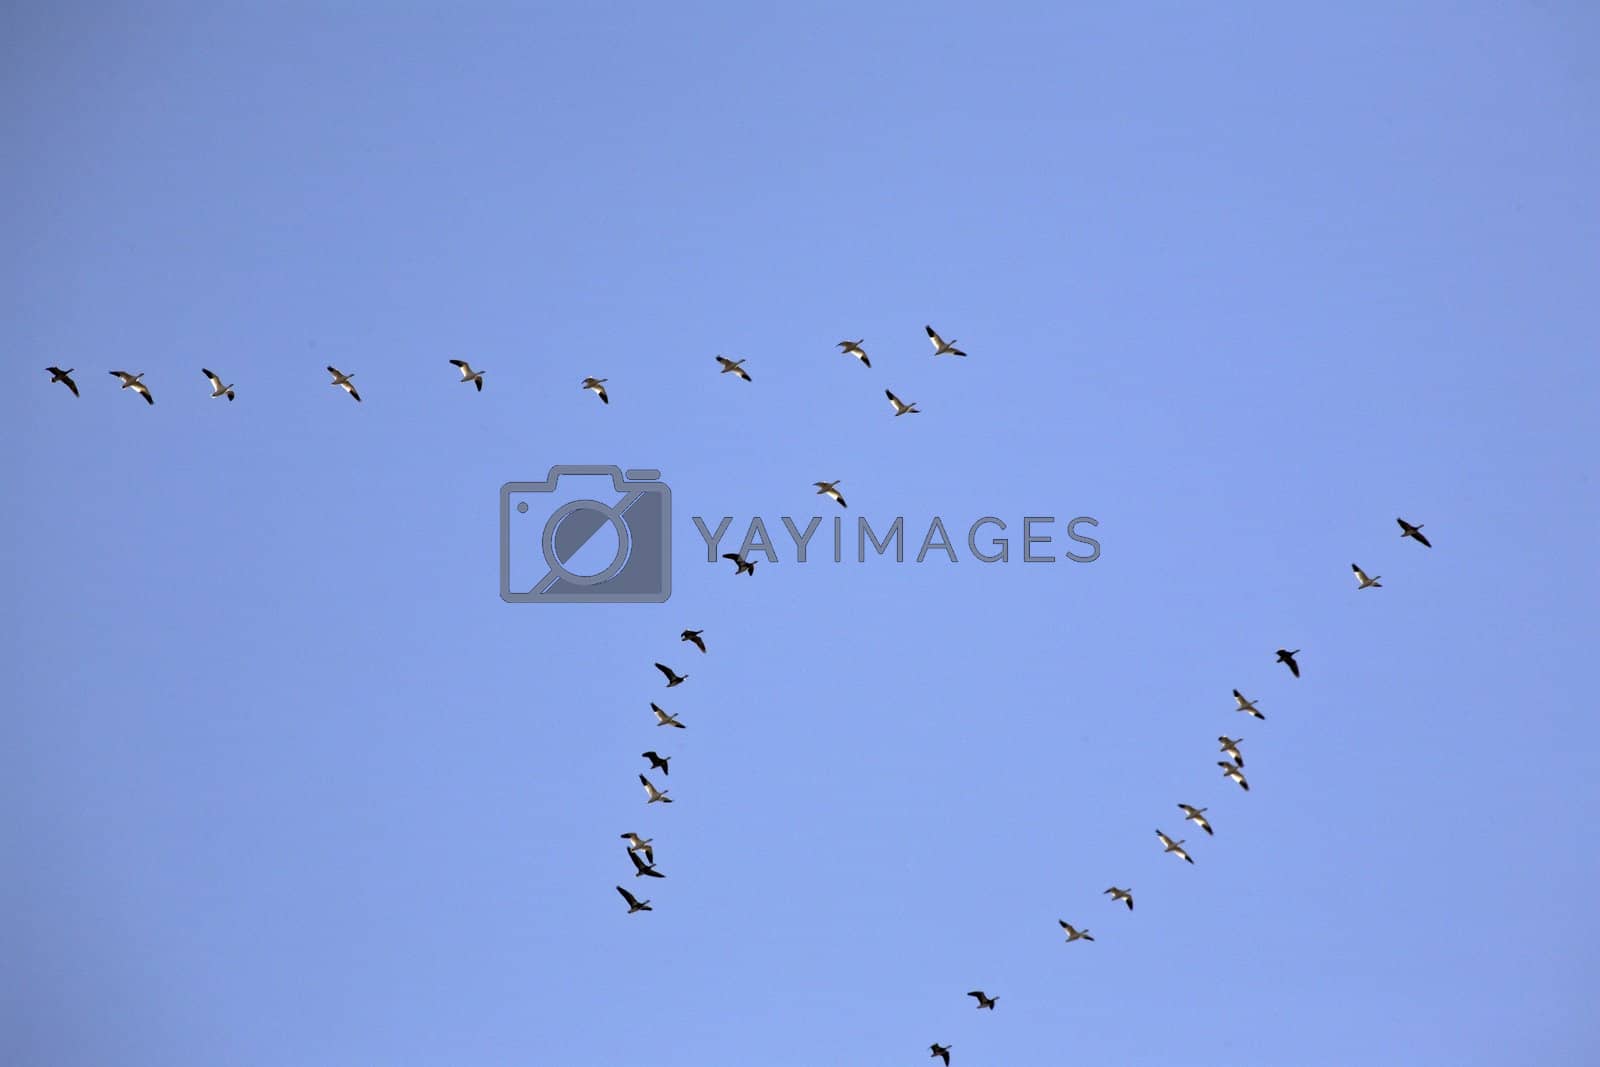 Royalty free image of Snow Geese in flight by pictureguy